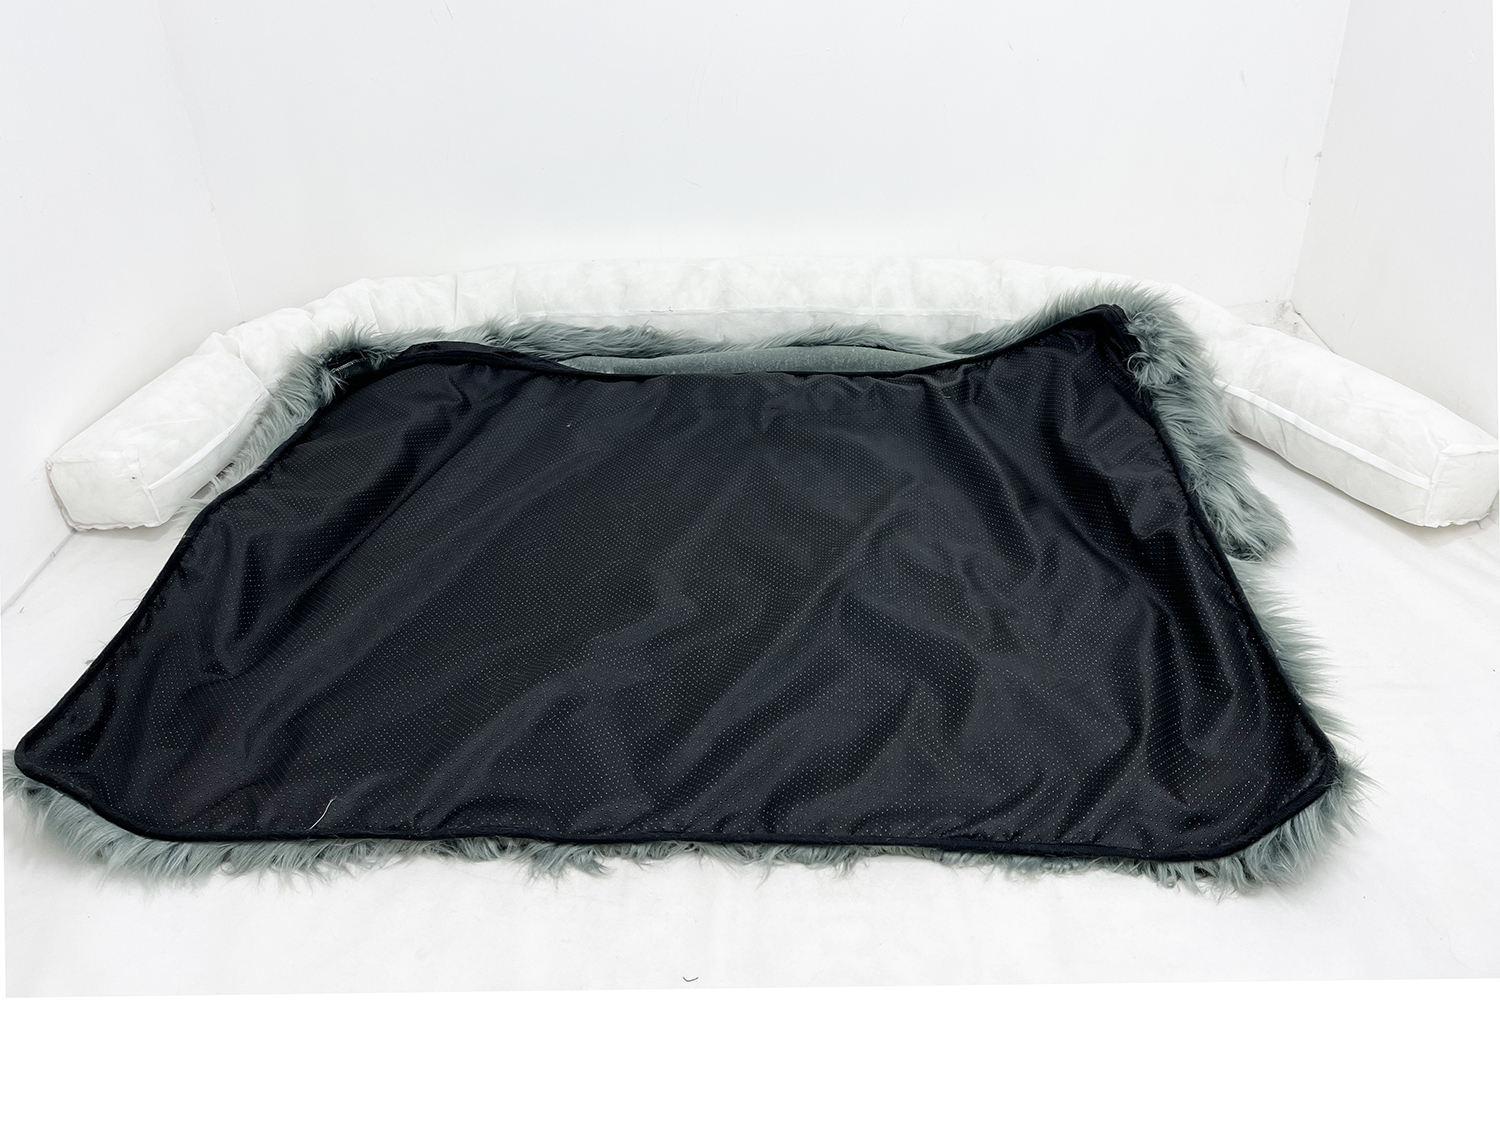 pet Faux Fur Furniture Pet Couch Dog Protector Sofa Dog Bed With Removable Cover